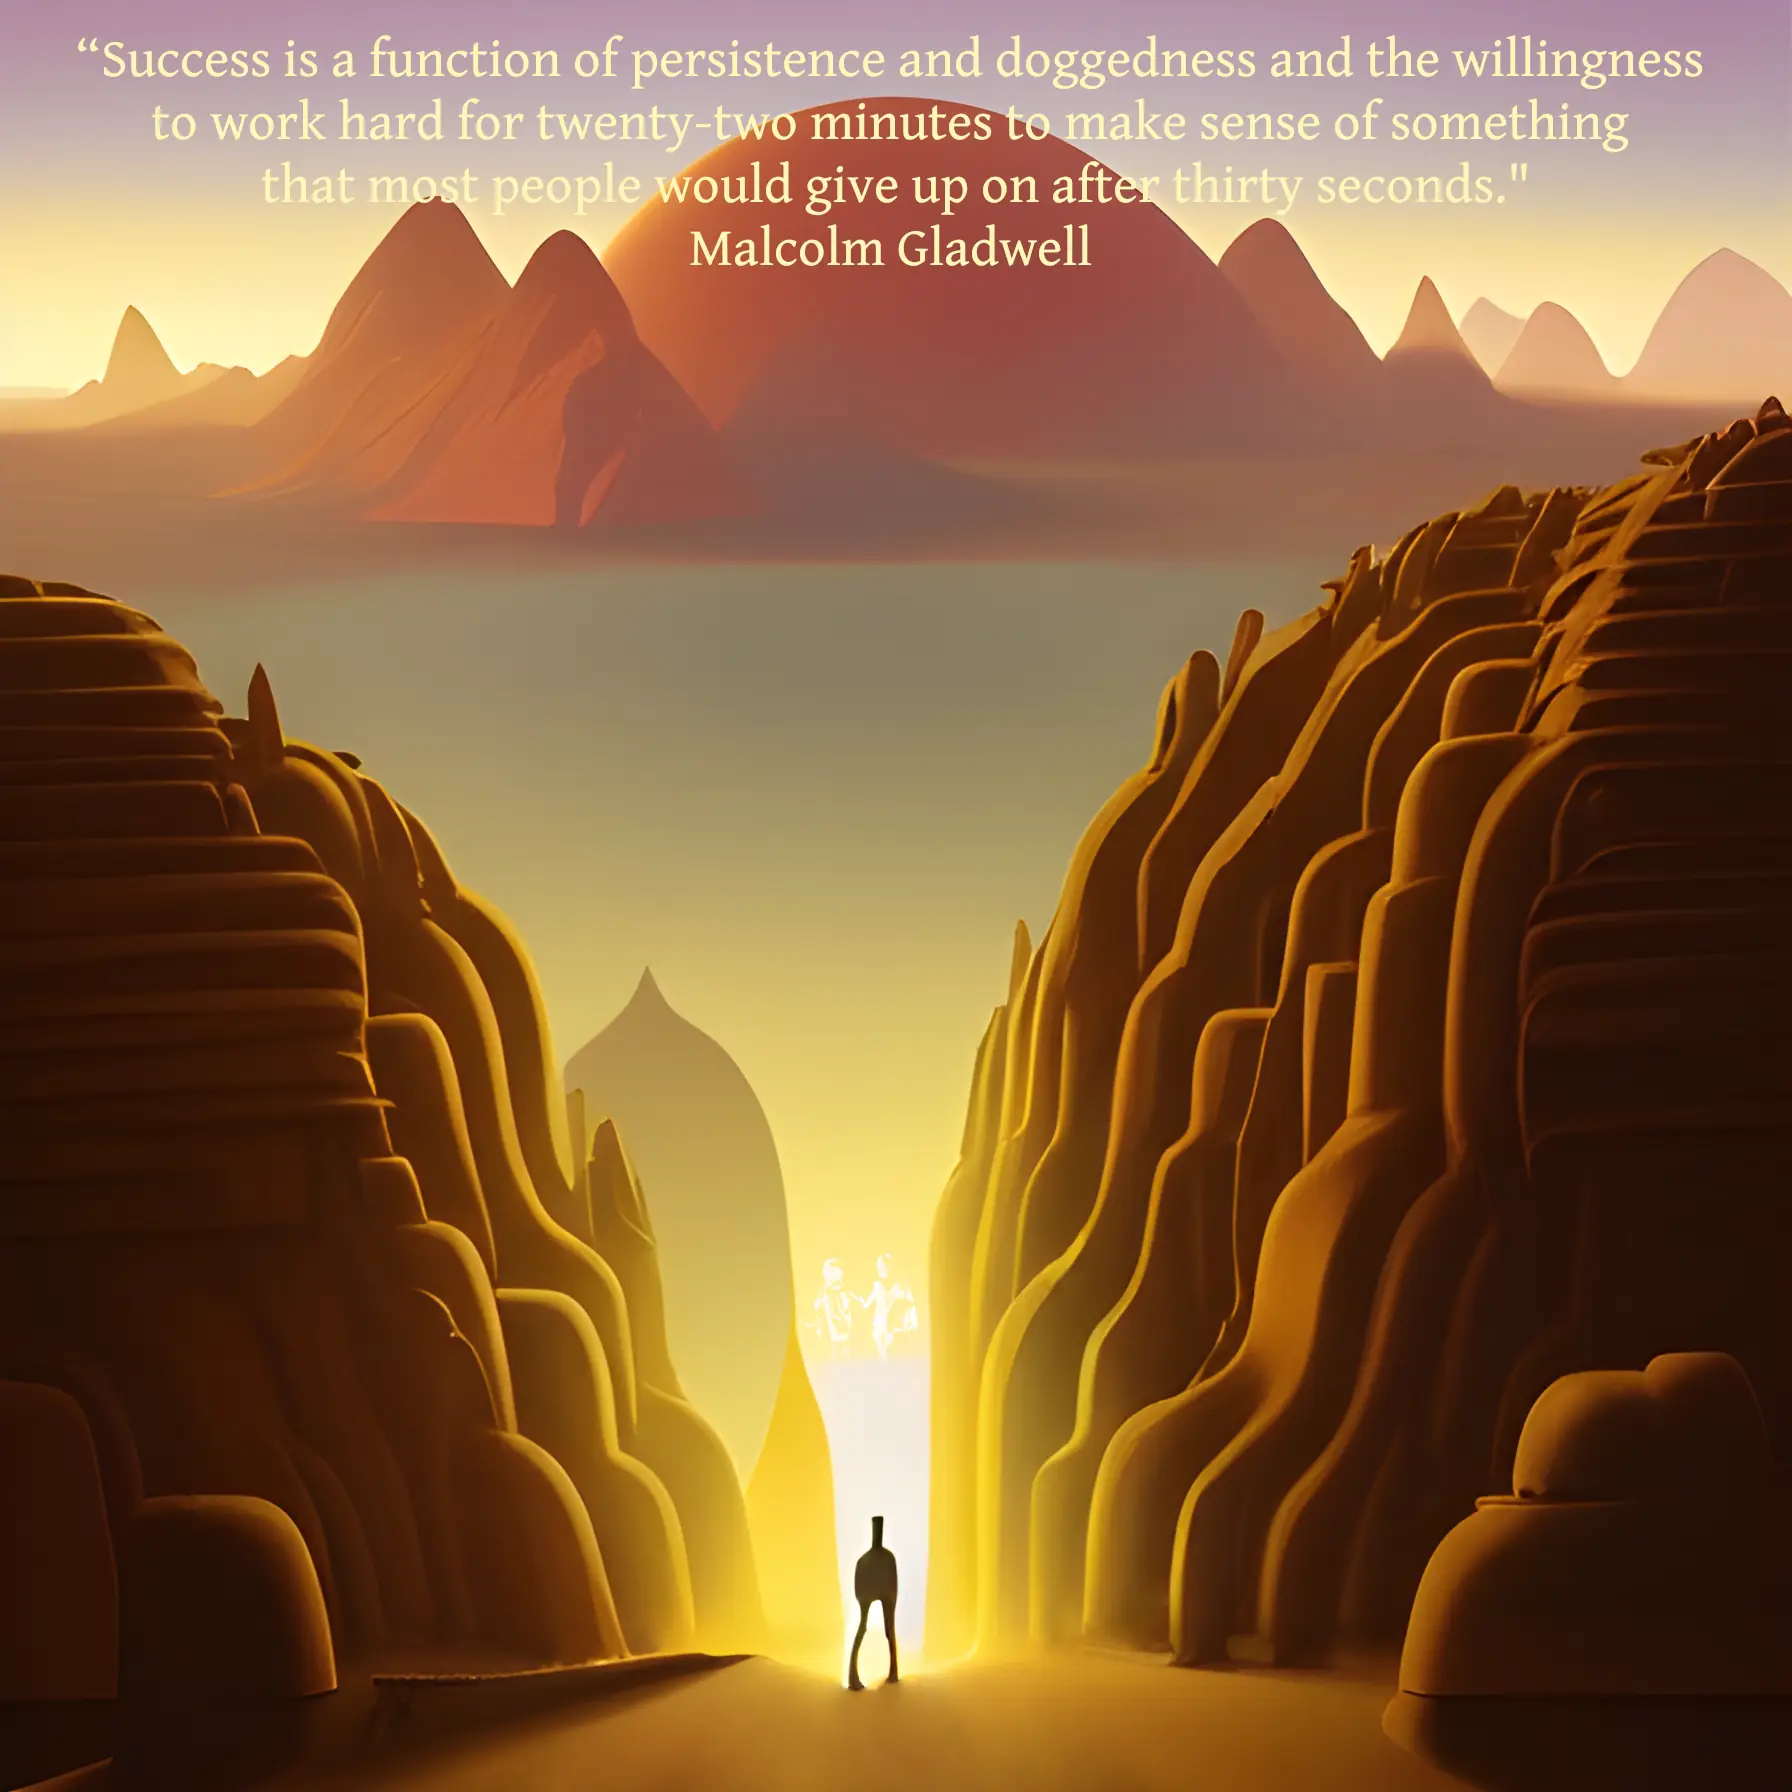 A figure stands bathed in light from an opening between two mountains. The figure is walking toward more mountains in the foreground. A quote reads: “Success is a function of persistence and doggedness and the willingness to work hard for twenty-two minutes to make sense of something that most people would give up on after thirty seconds." - Malcolm Gladwell